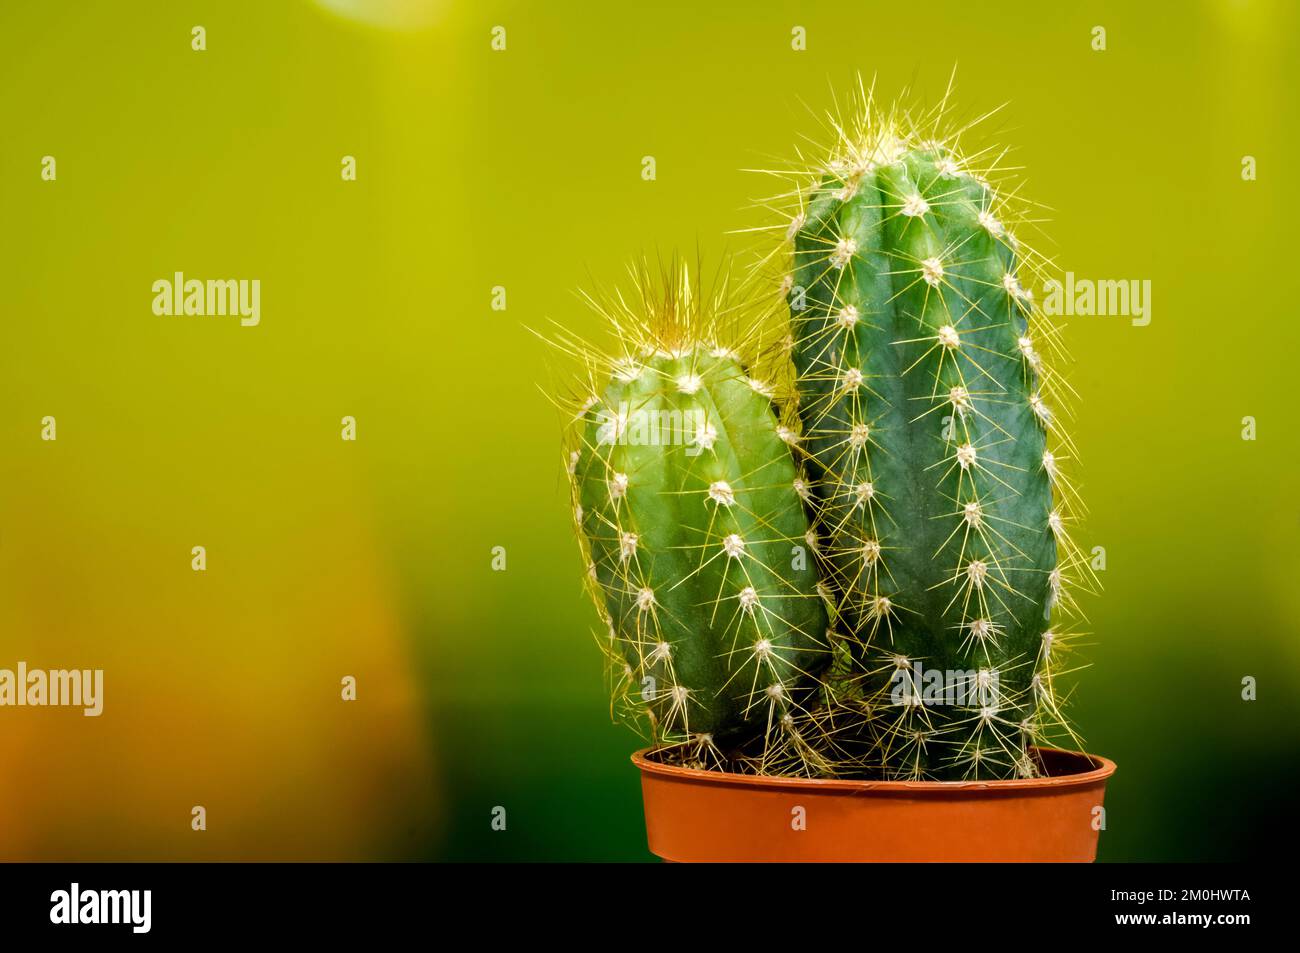 small decorative cacti with long colorful spines on a dynamic colorful blurred background, close-up plants, background wallpaper decoration, space for Stock Photo